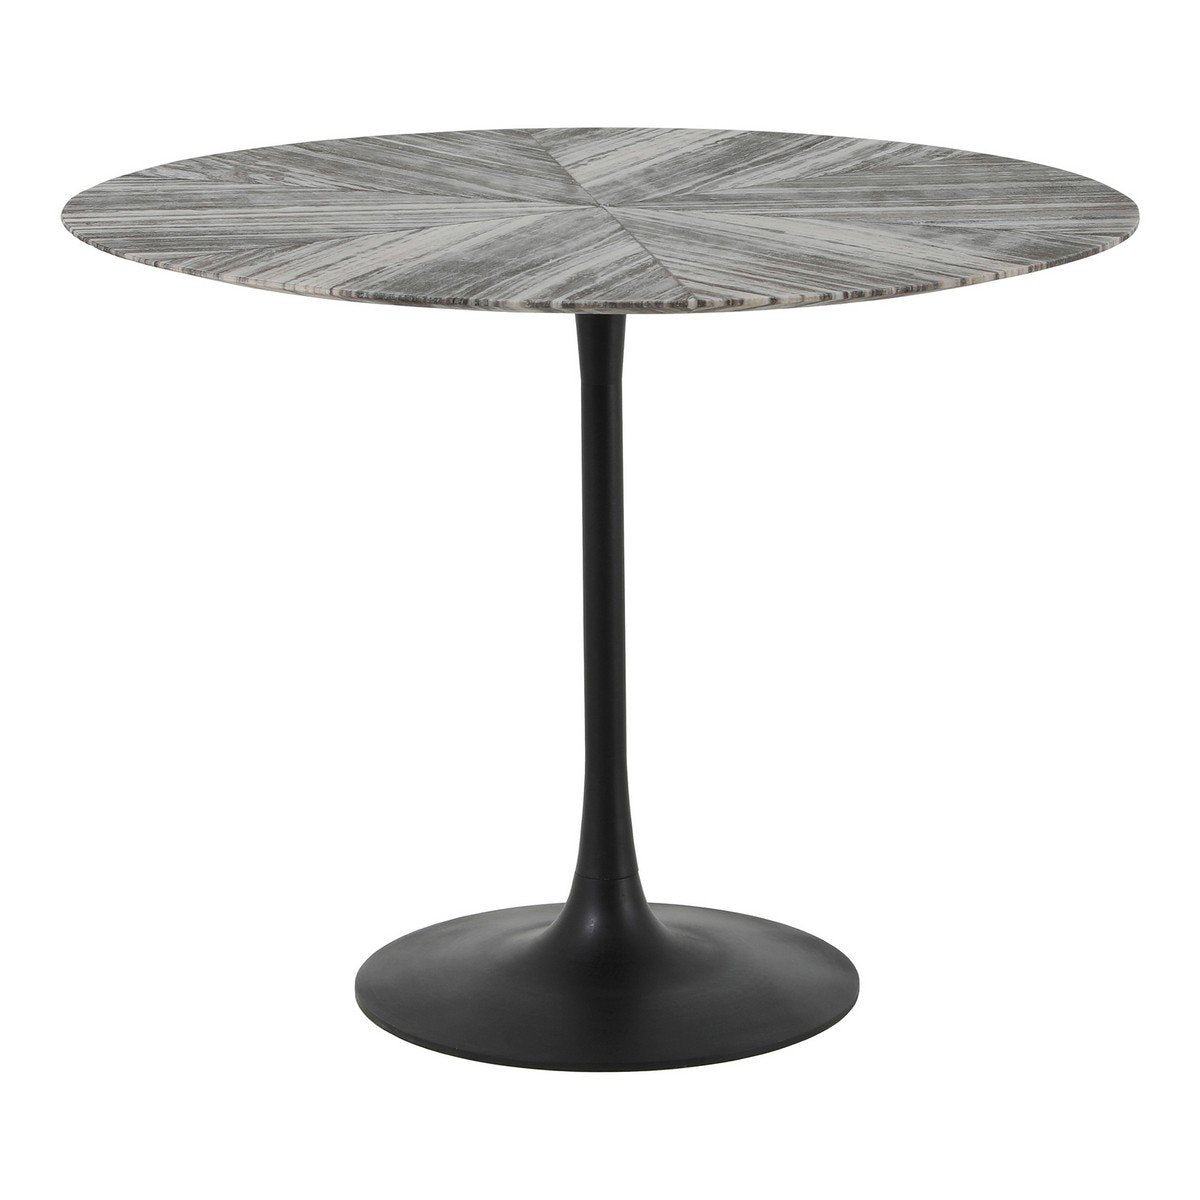 Moe's Home Collection Nyles Marble Dining Table - GK-1005-37 - Moe's Home Collection - Dining Tables - Minimal And Modern - 1